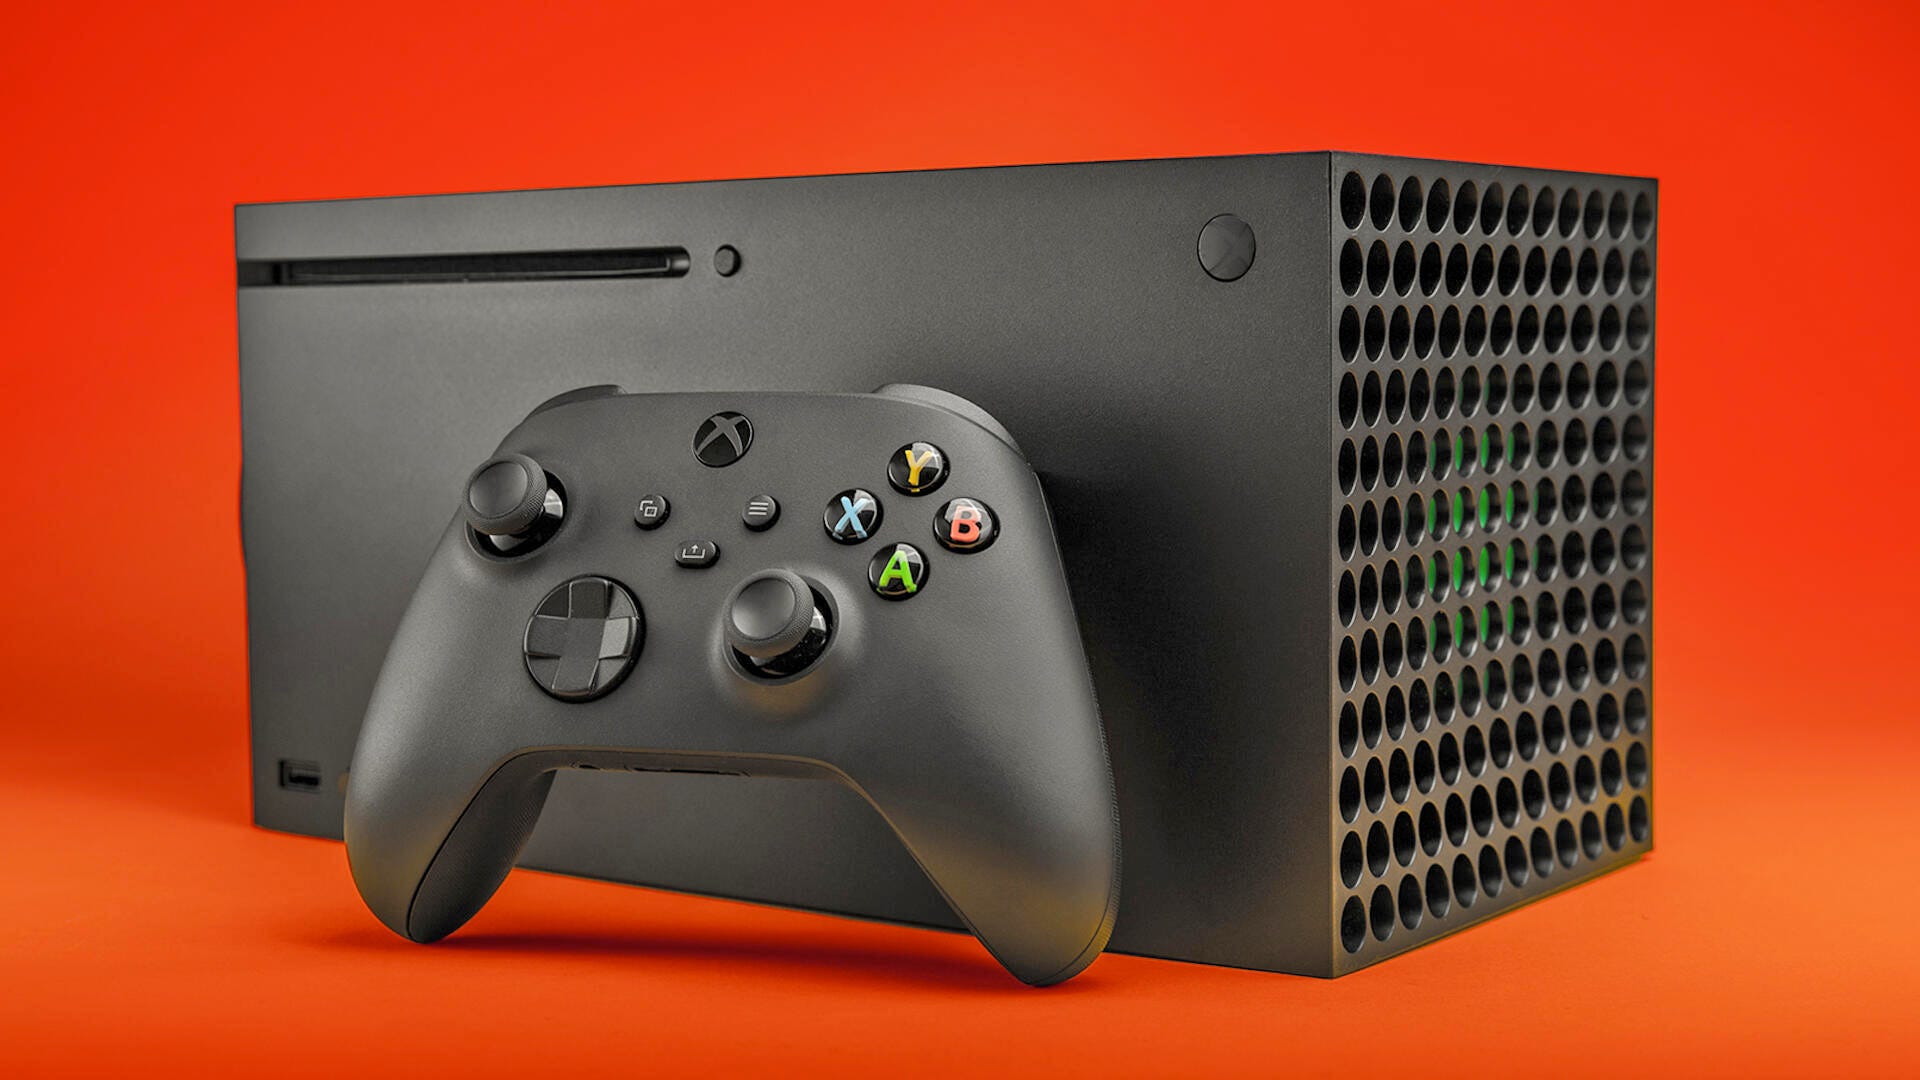 Xbox Series X unboxing: What comes in the box - Video - CNET